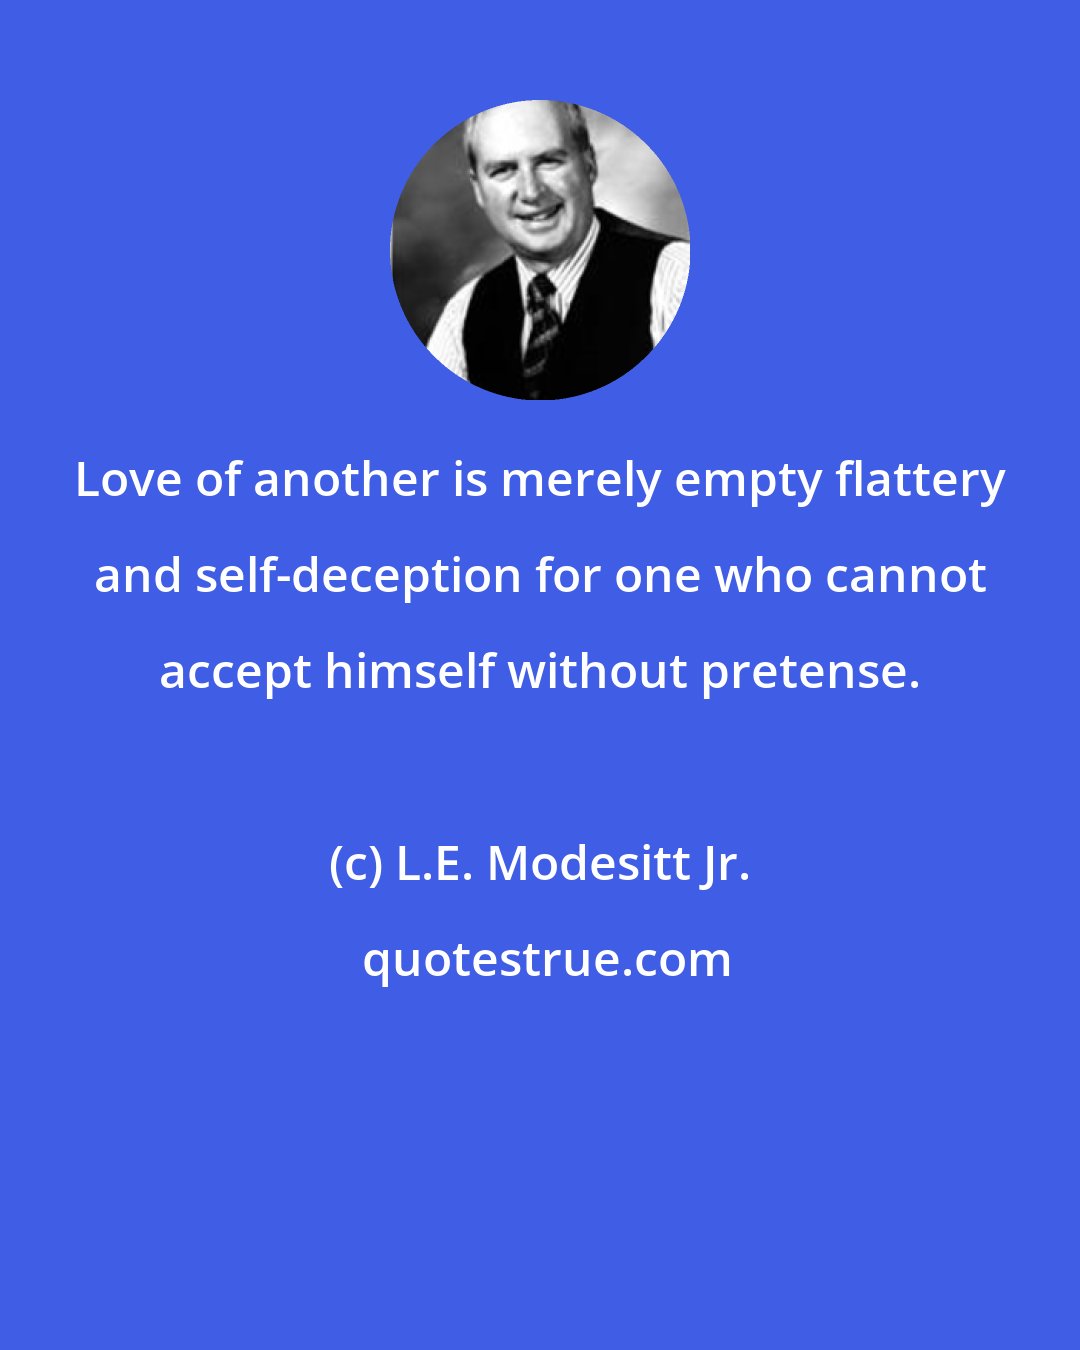 L.E. Modesitt Jr.: Love of another is merely empty flattery and self-deception for one who cannot accept himself without pretense.